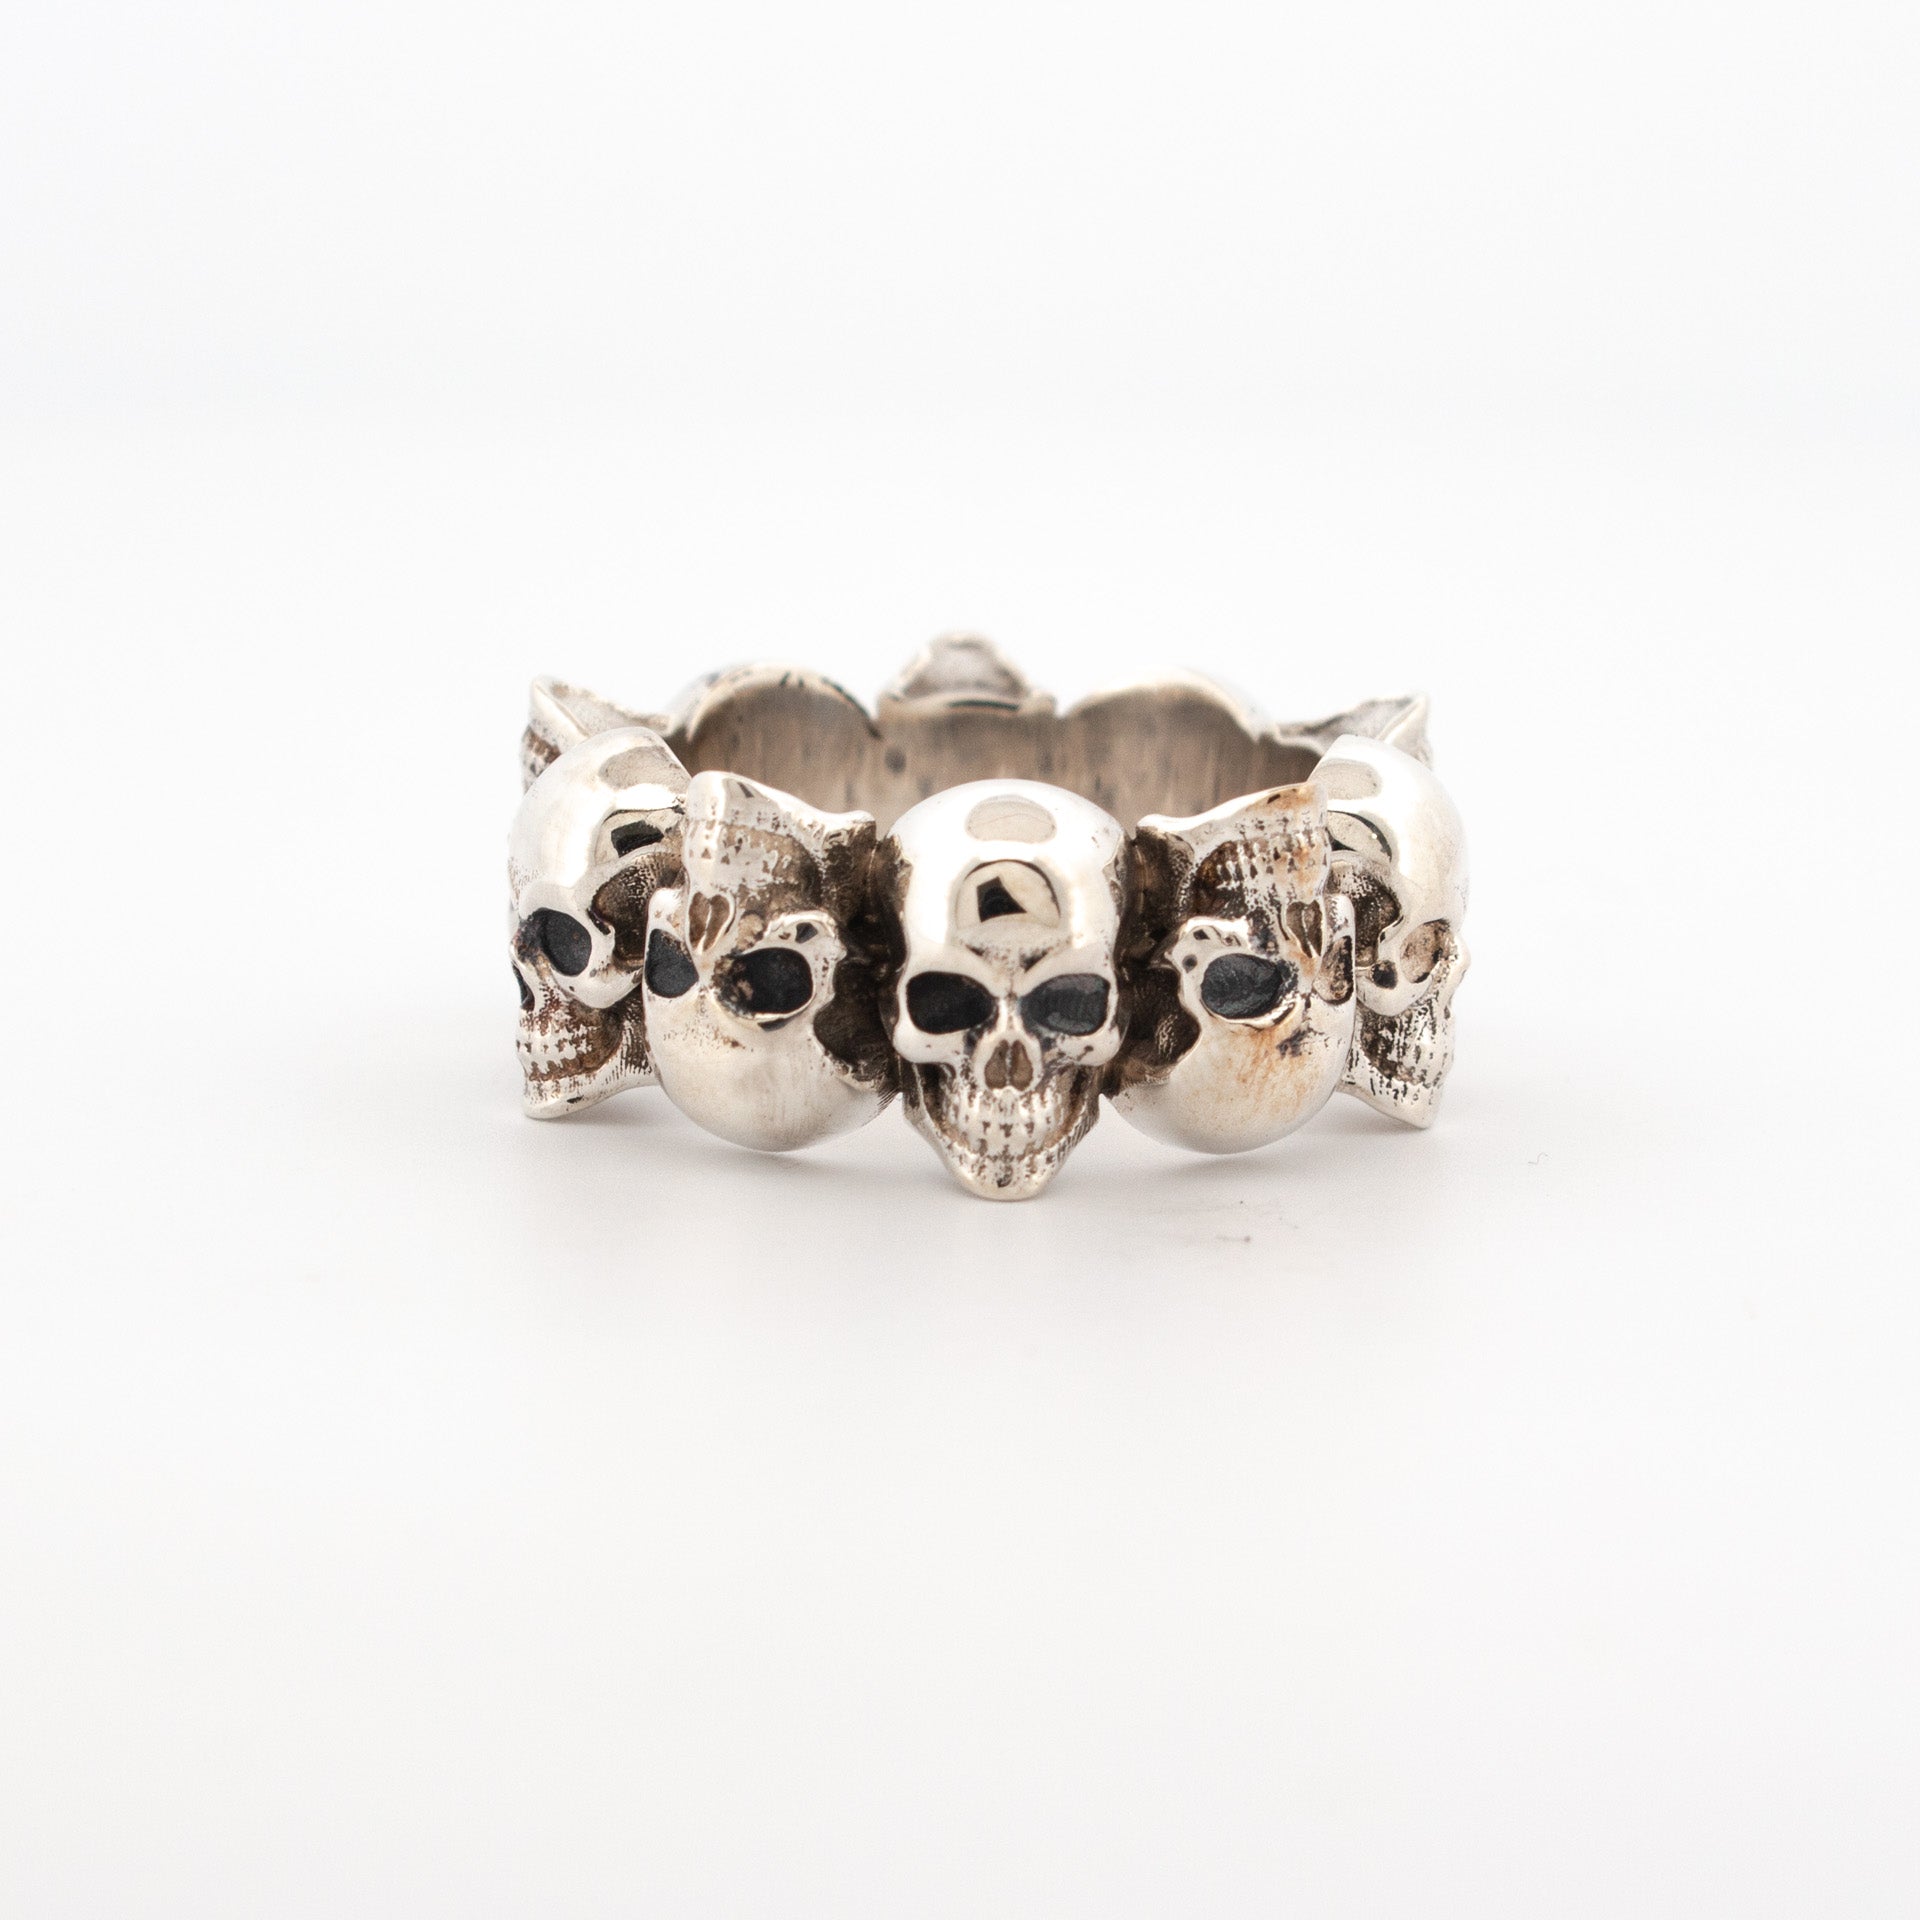 Connected Skulls Ring